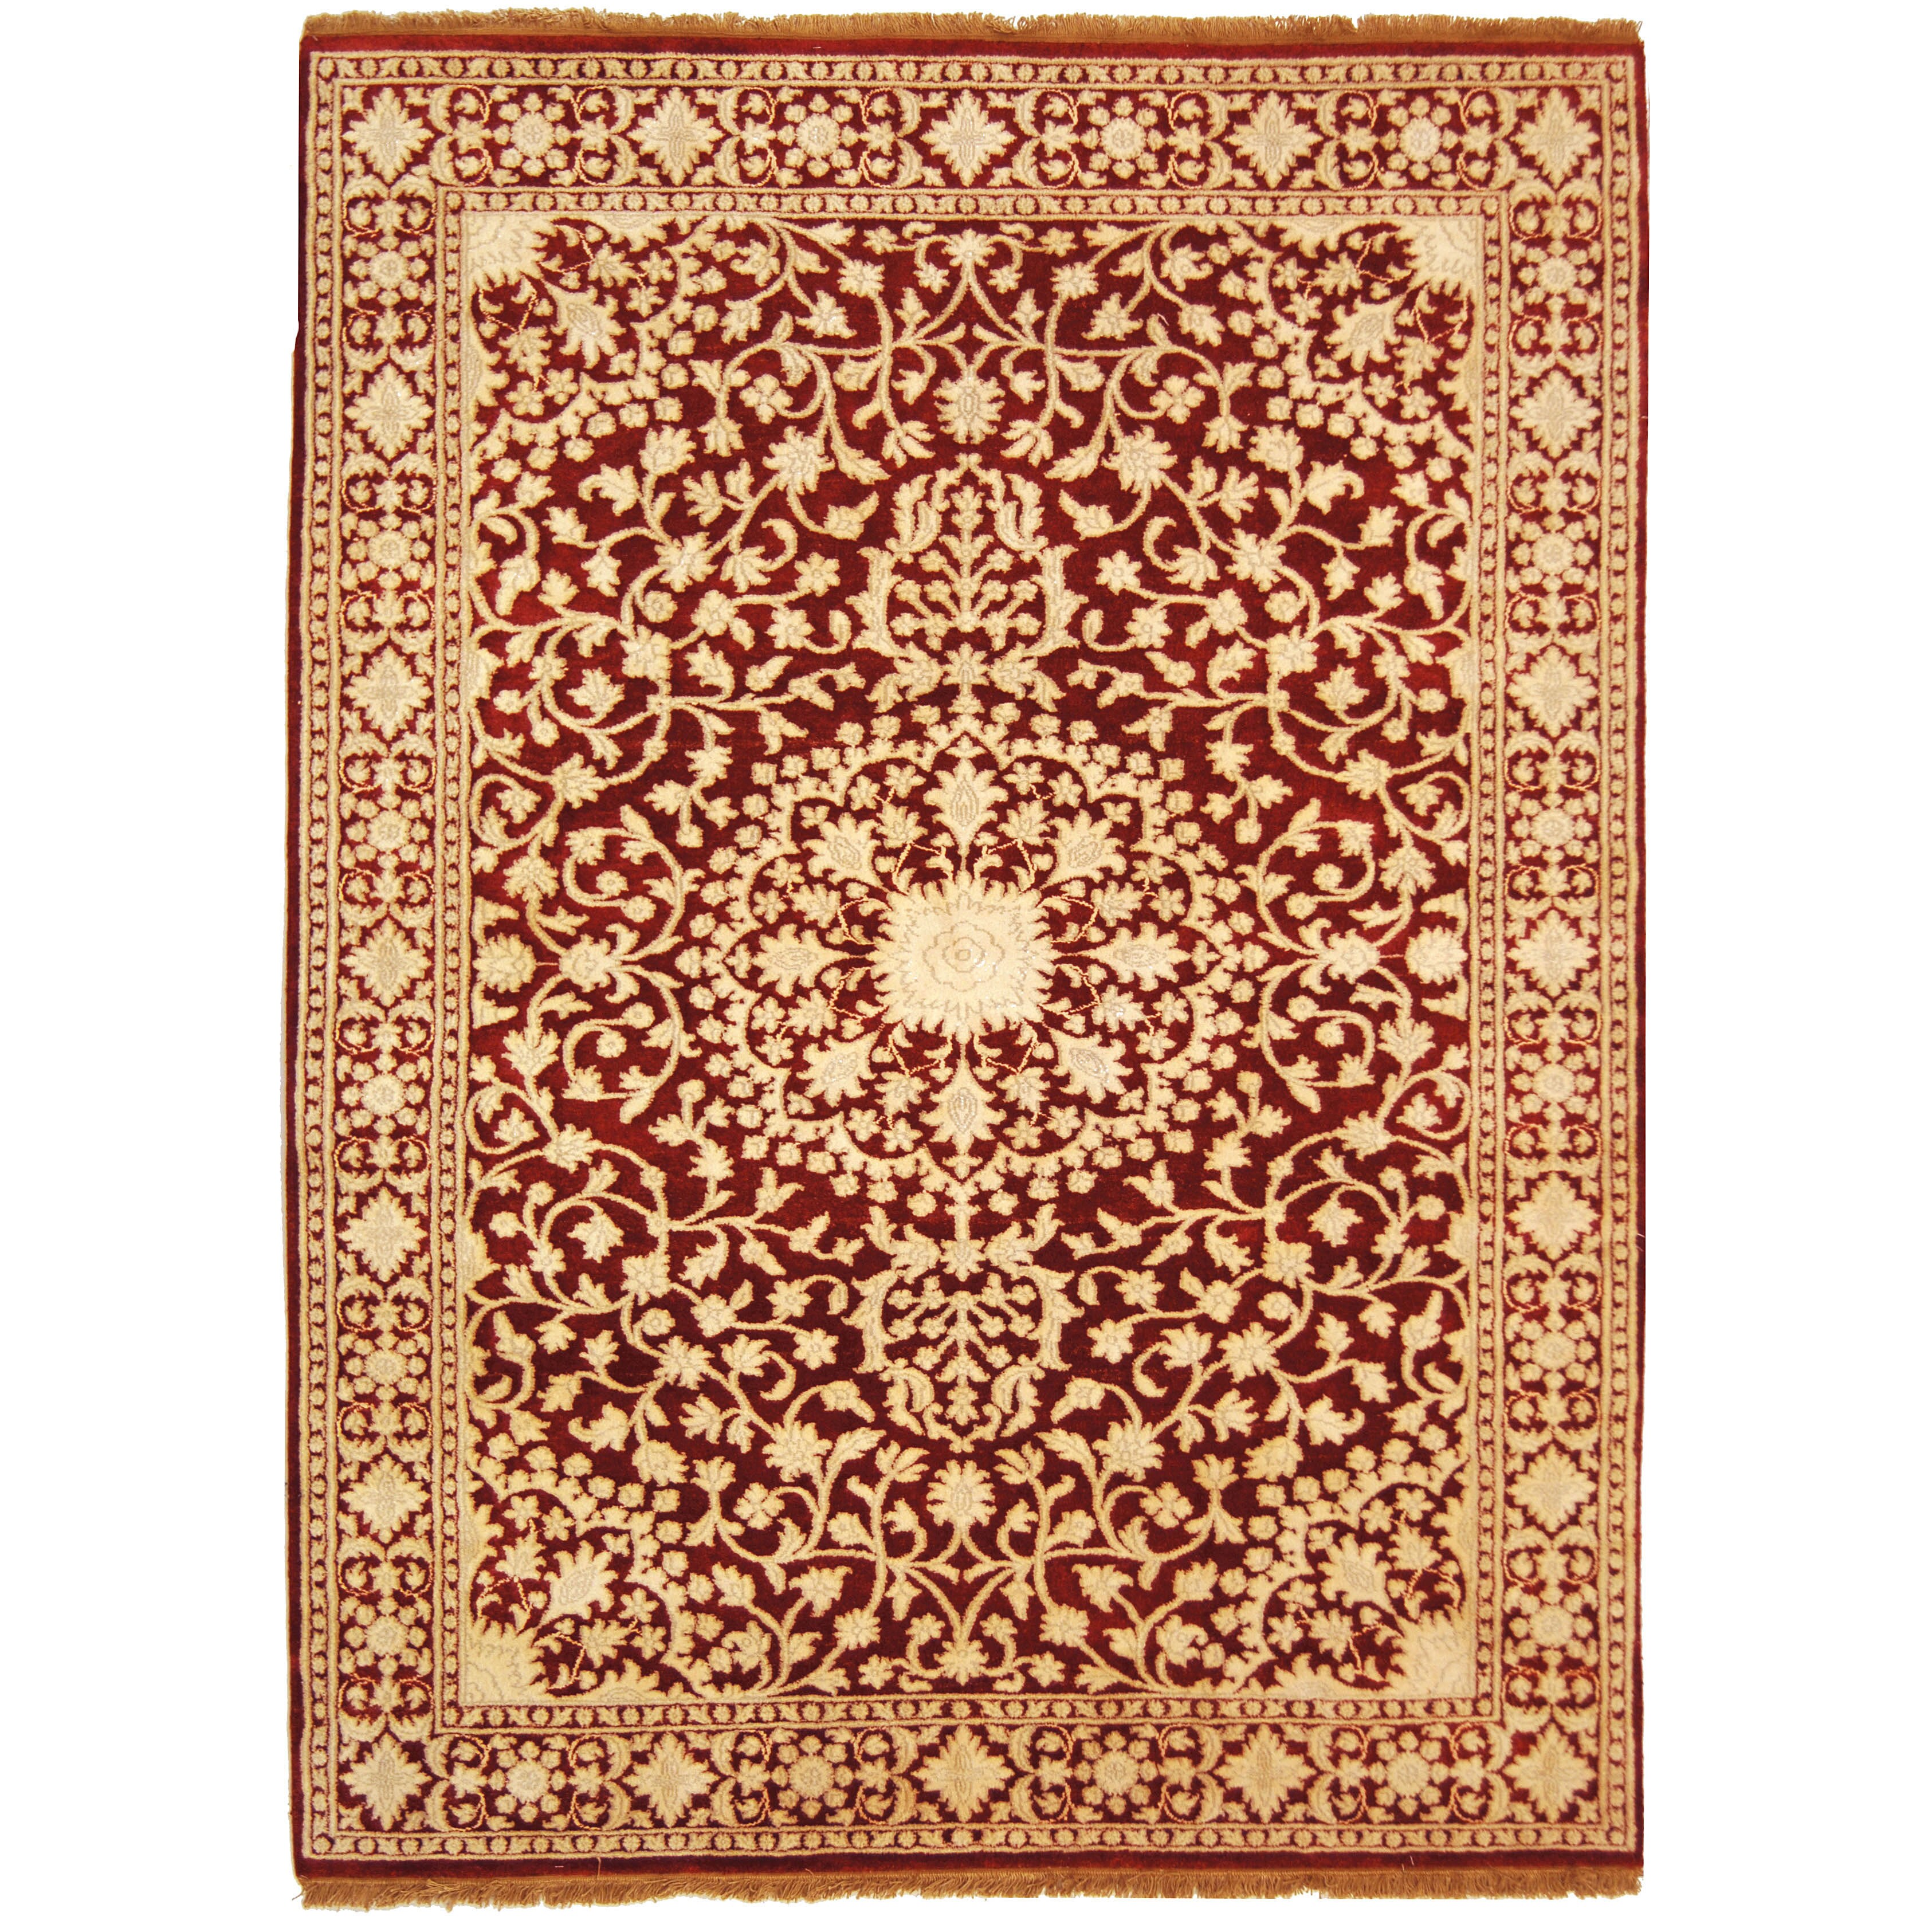 Safavieh Hand knotted Ganges River Red/ Ivory Wool Rug (8 X 10)